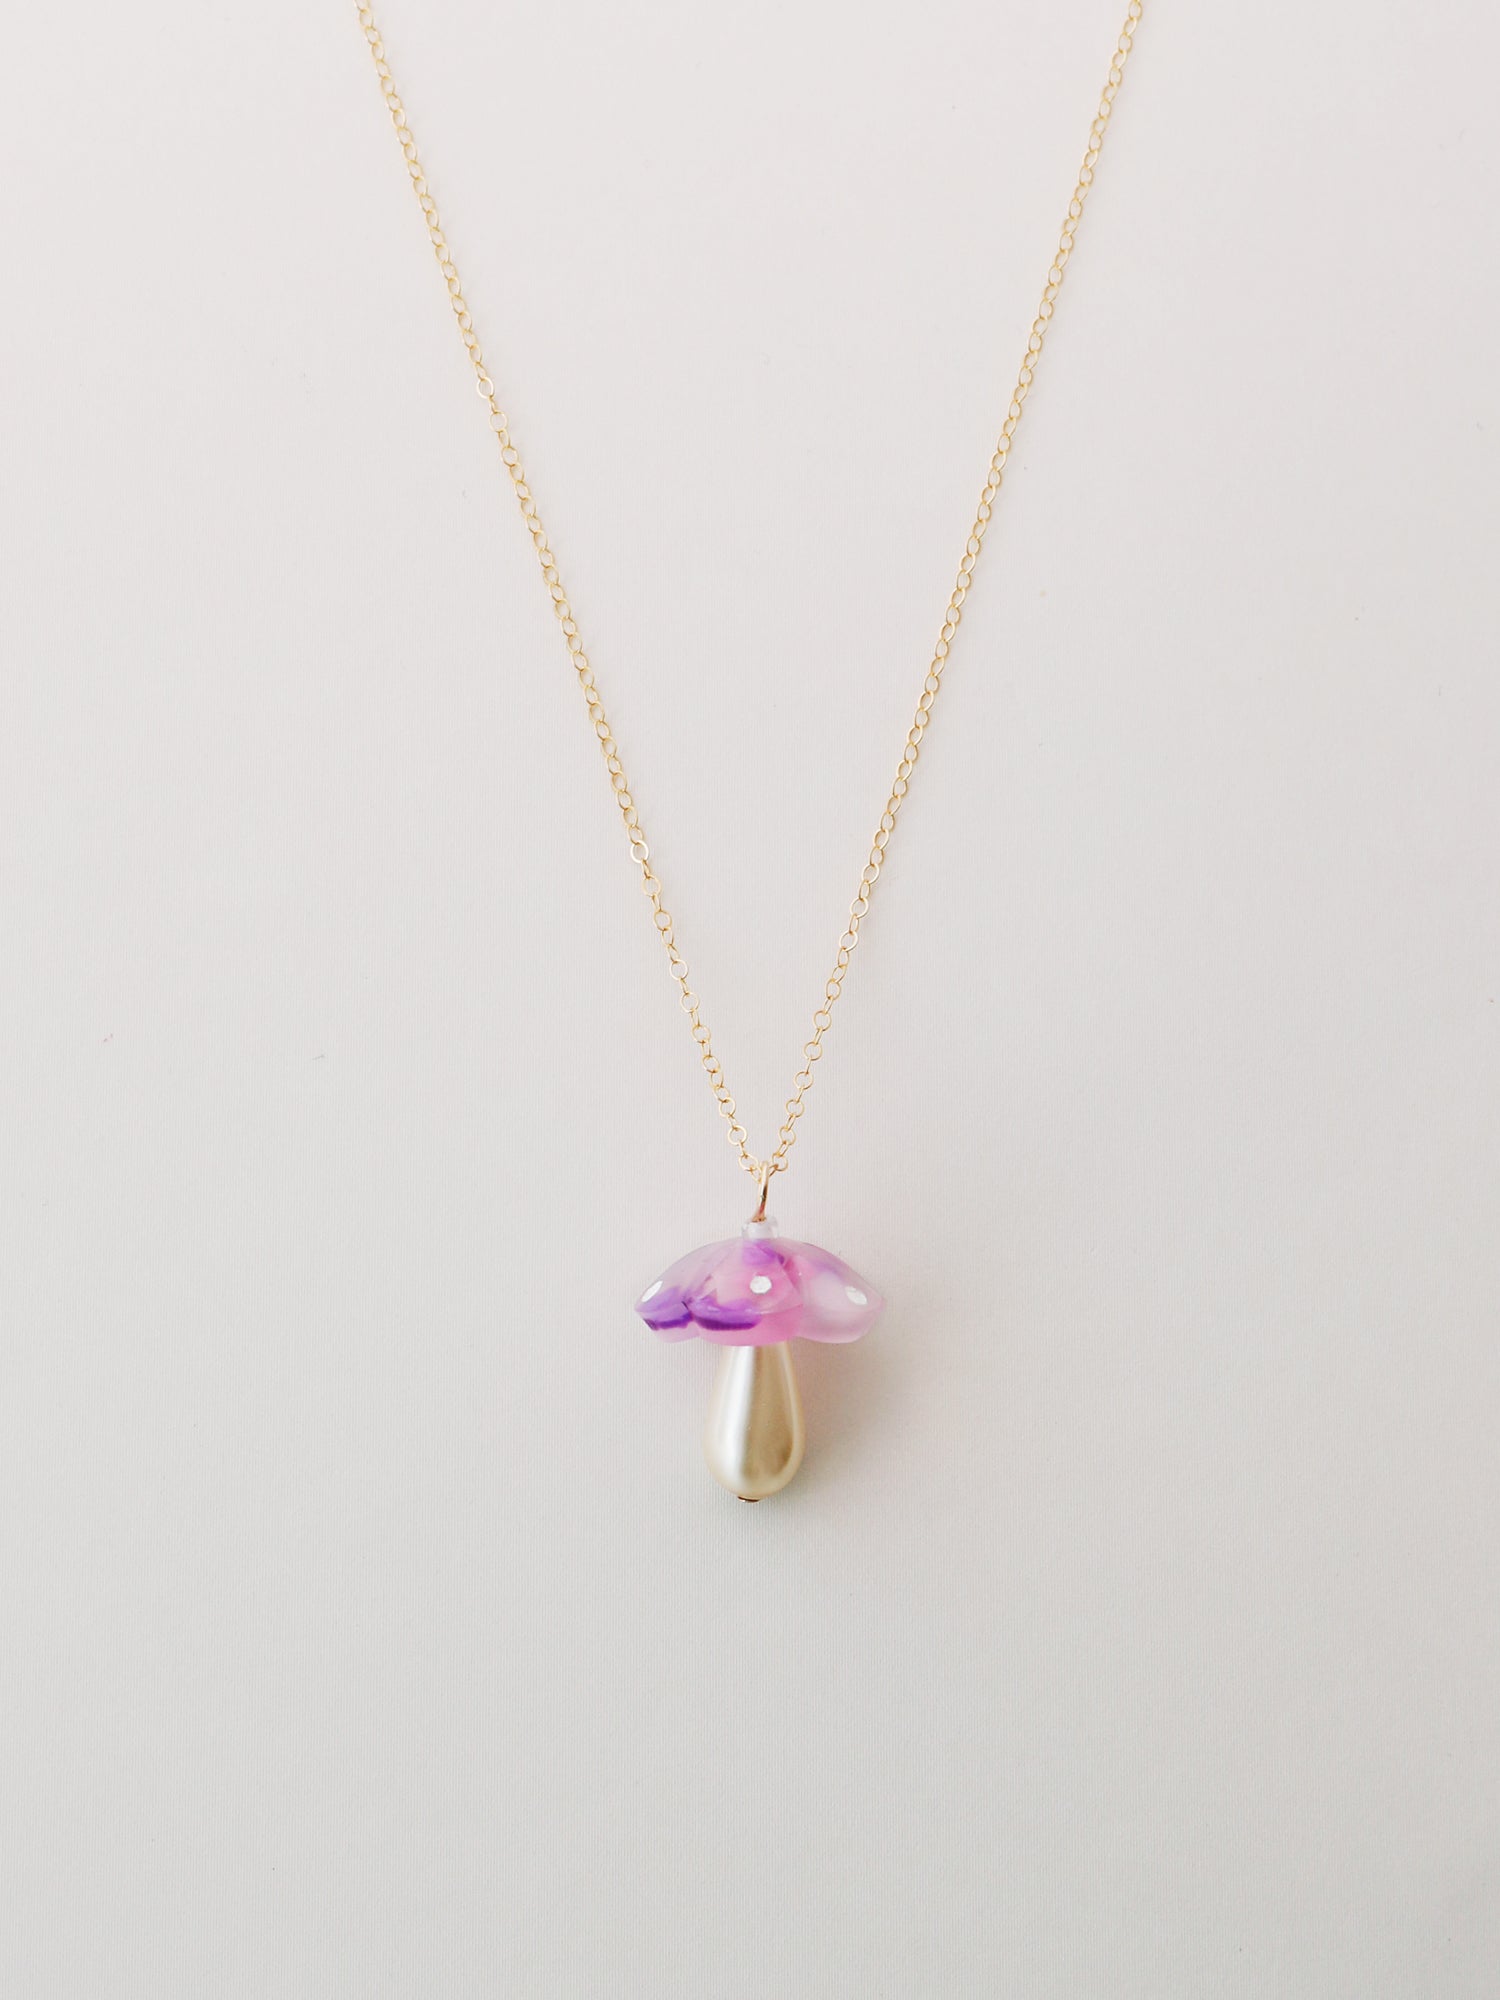 Lavender mushroom pendant necklace. Made from heat-formed speckled acrylic with hand-inked details and finished off with a high quality Czech glass pearl. Pendant is hung on a high quality 50cm 14k gold-filled chain. Handmade in the UK by Wolf & Moon.